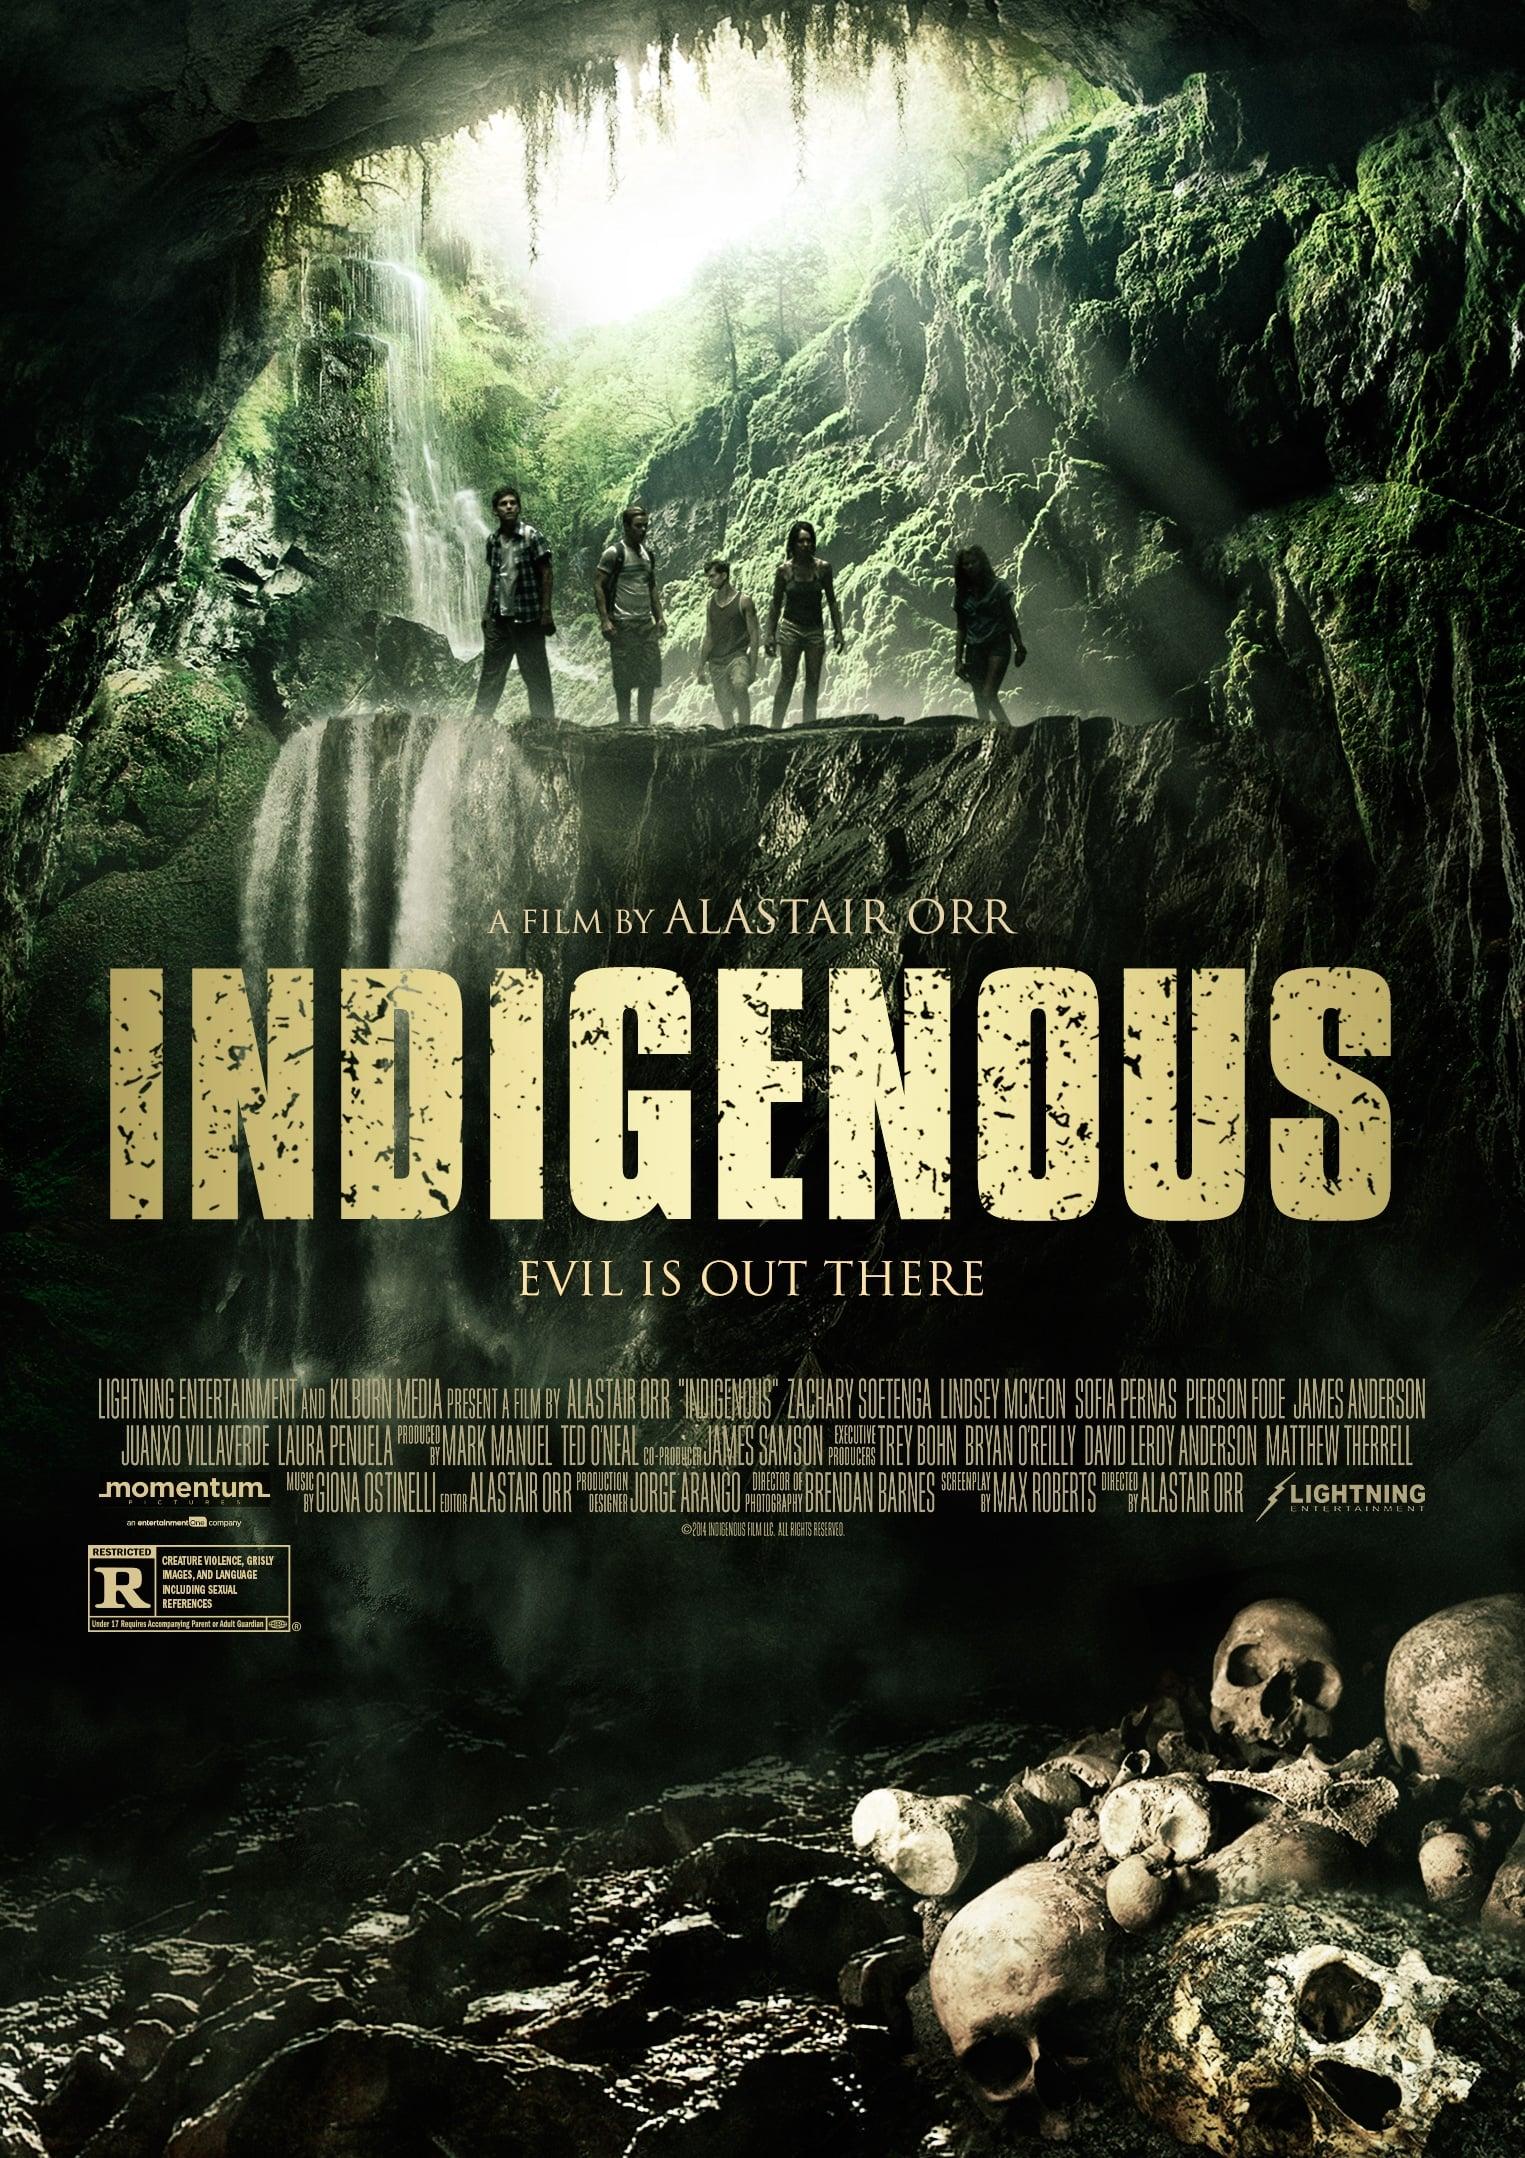 Indigenous poster